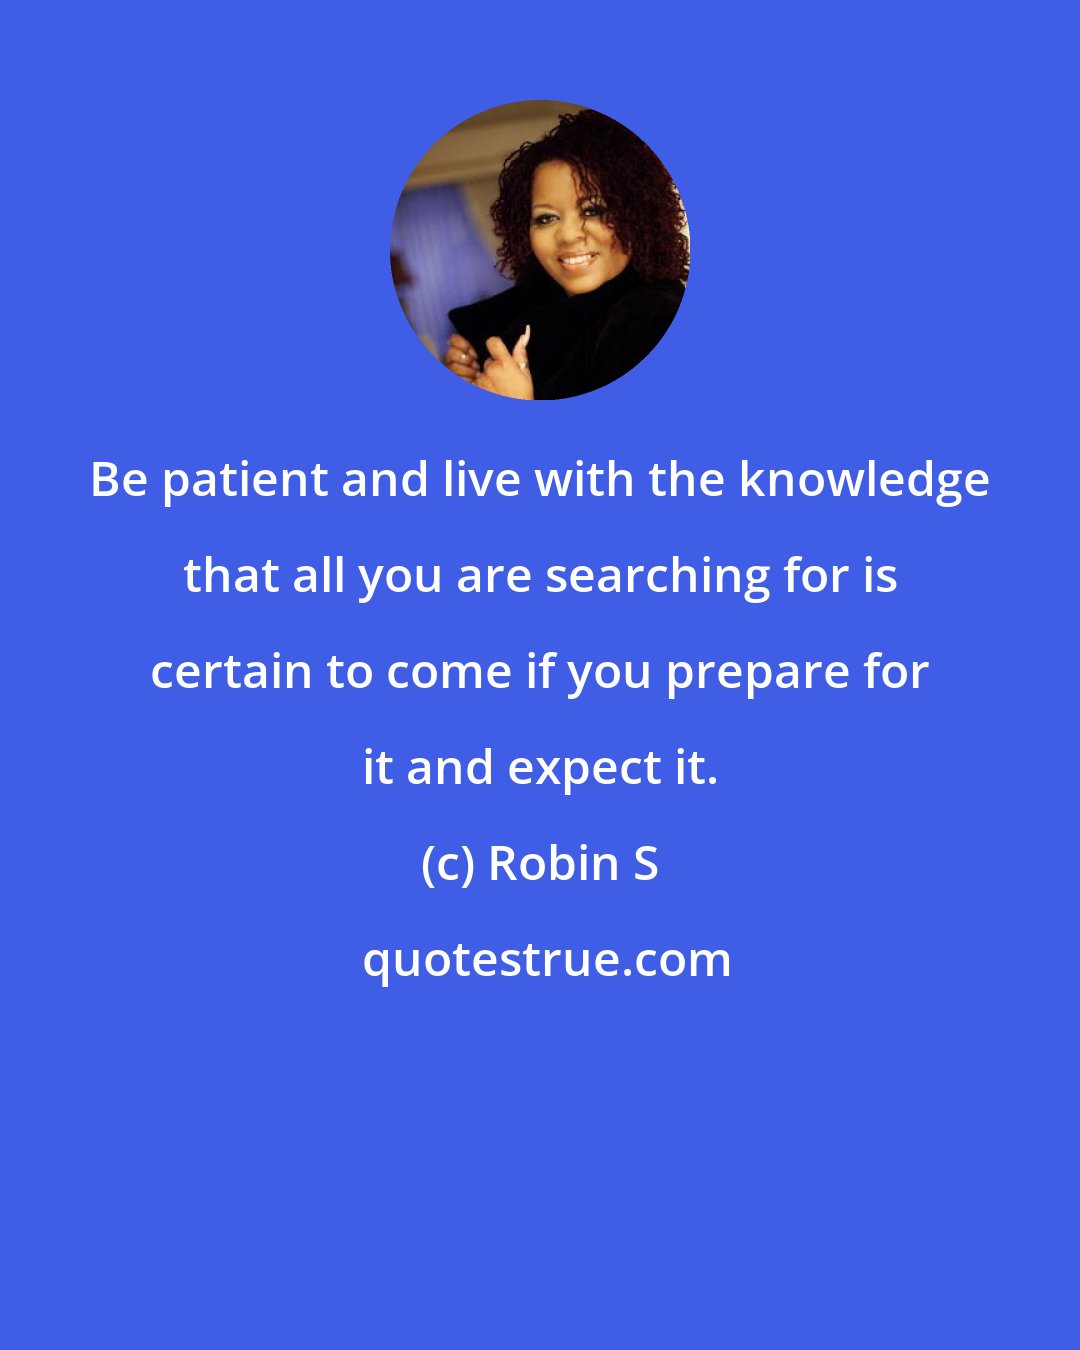 Robin S: Be patient and live with the knowledge that all you are searching for is certain to come if you prepare for it and expect it.